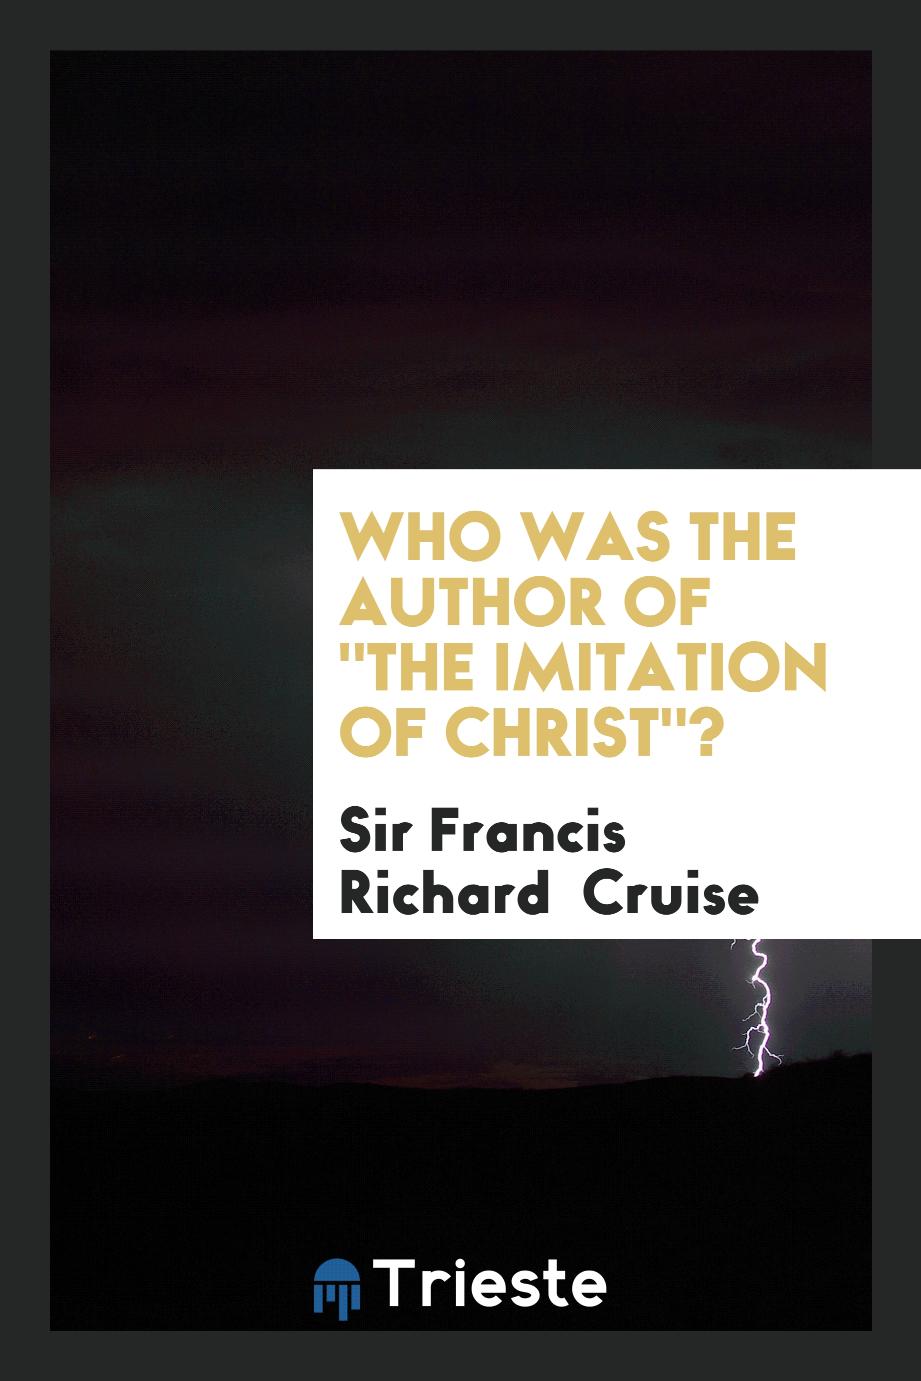 Who was the Author of "The Imitation of Christ"?